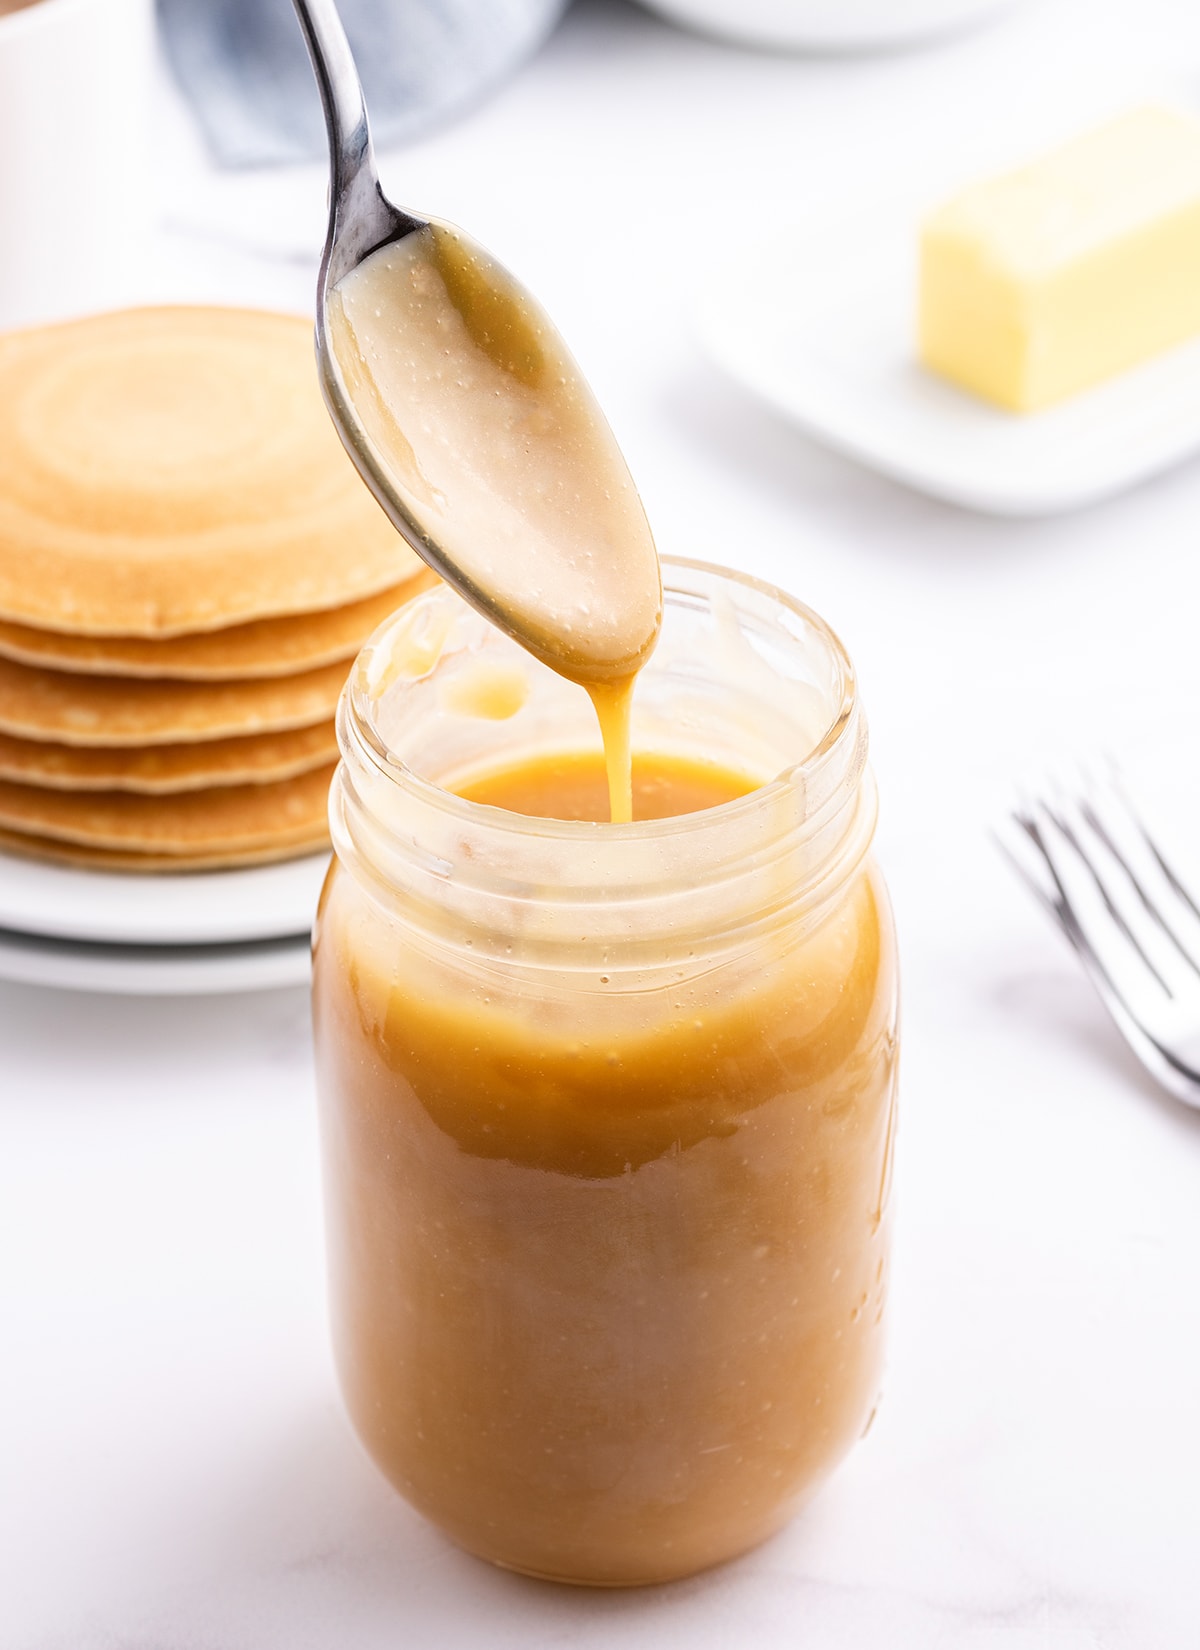 A spoon drizzling buttermilk syrup above a jar of it.